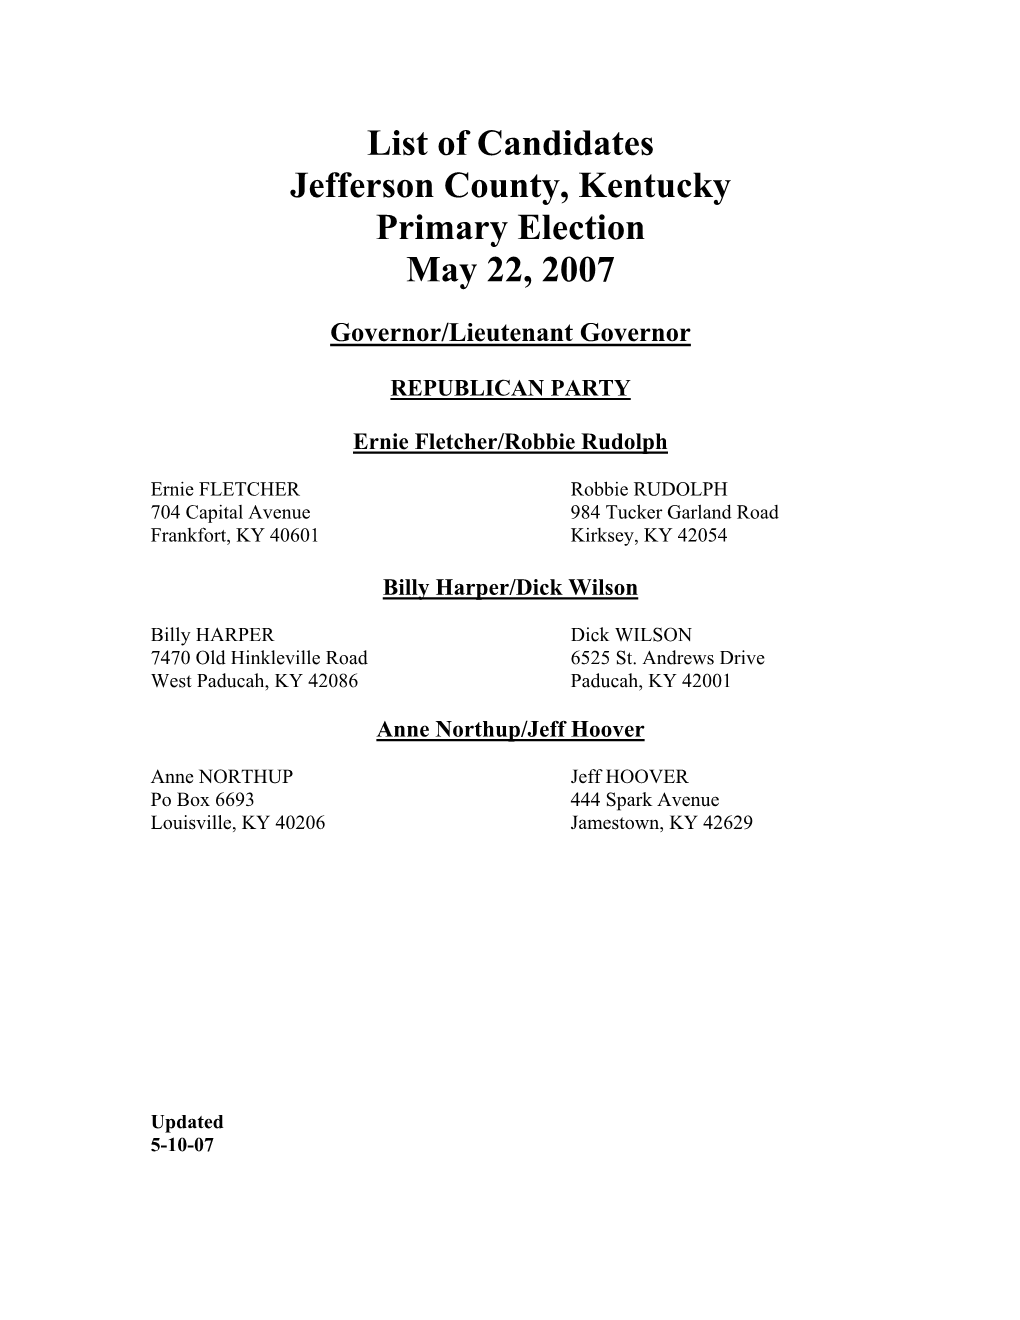 List of Candidates Jefferson County, Kentucky Primary Election May 22, 2007